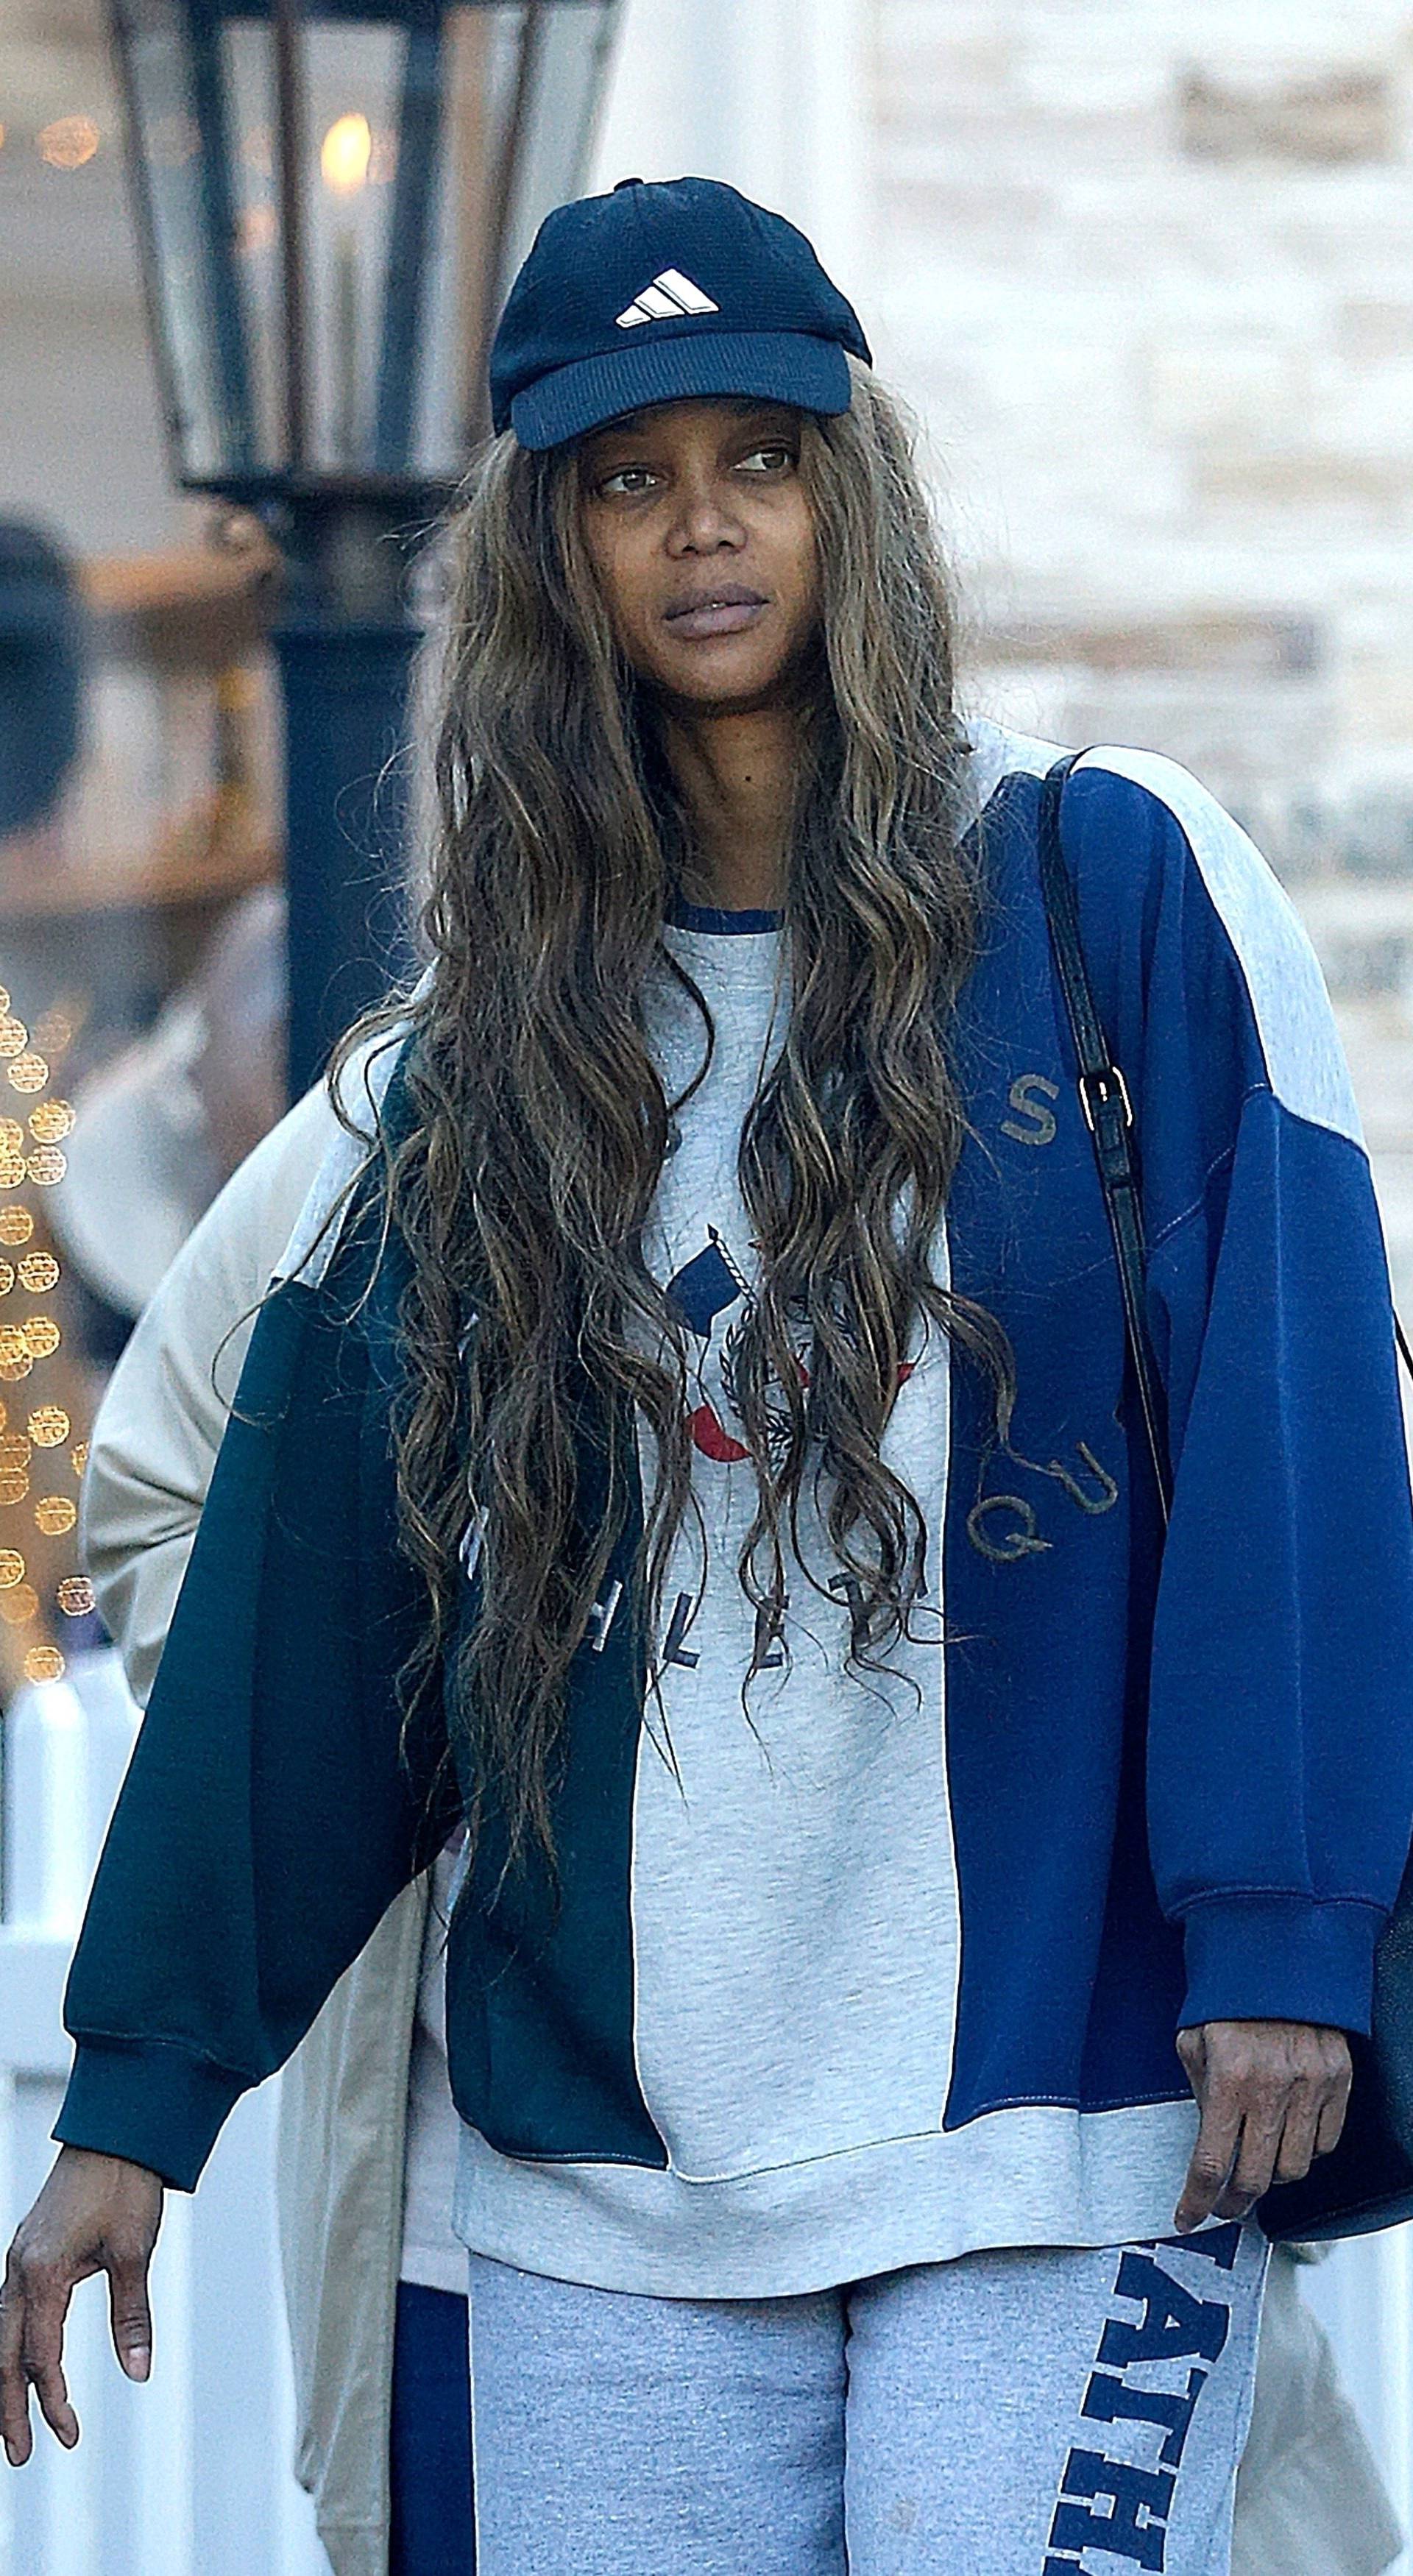 *EXCLUSIVE* Tyra Banks looks the opposite of her "Life-Size 2" character as she steps out with no makeup